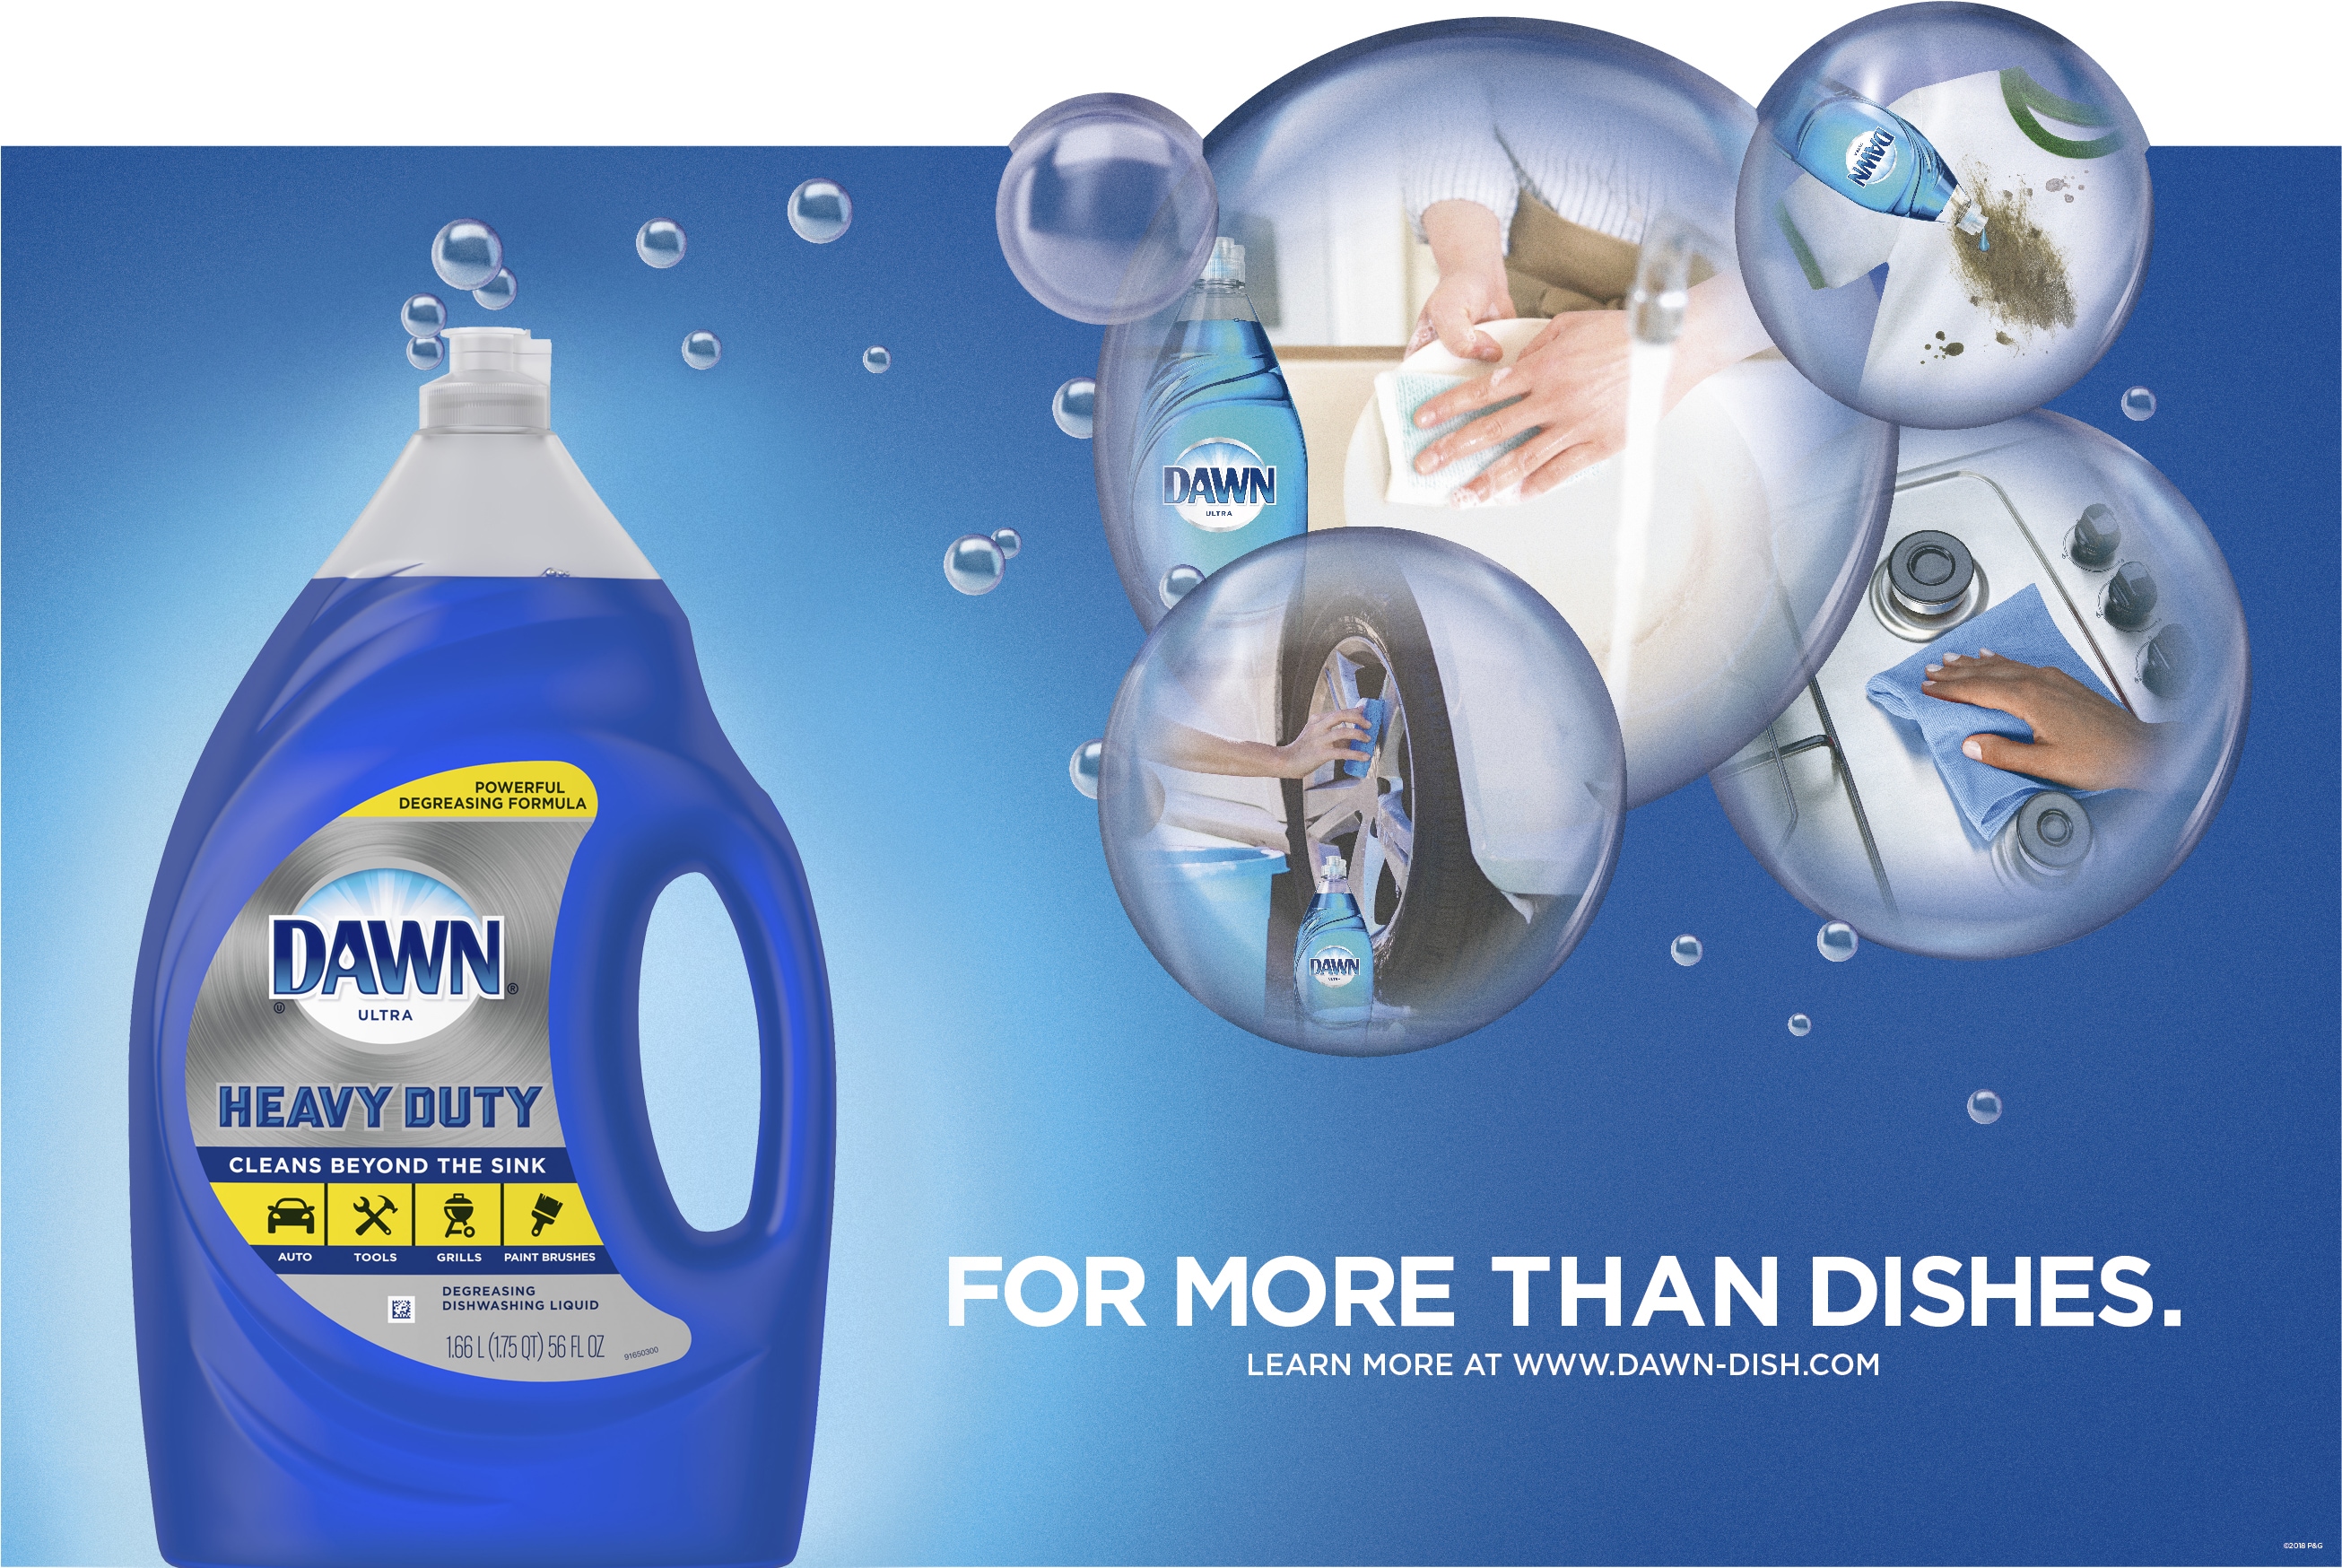 Quilting Tip of the Day: Dawn dishwashing soap is great to wash